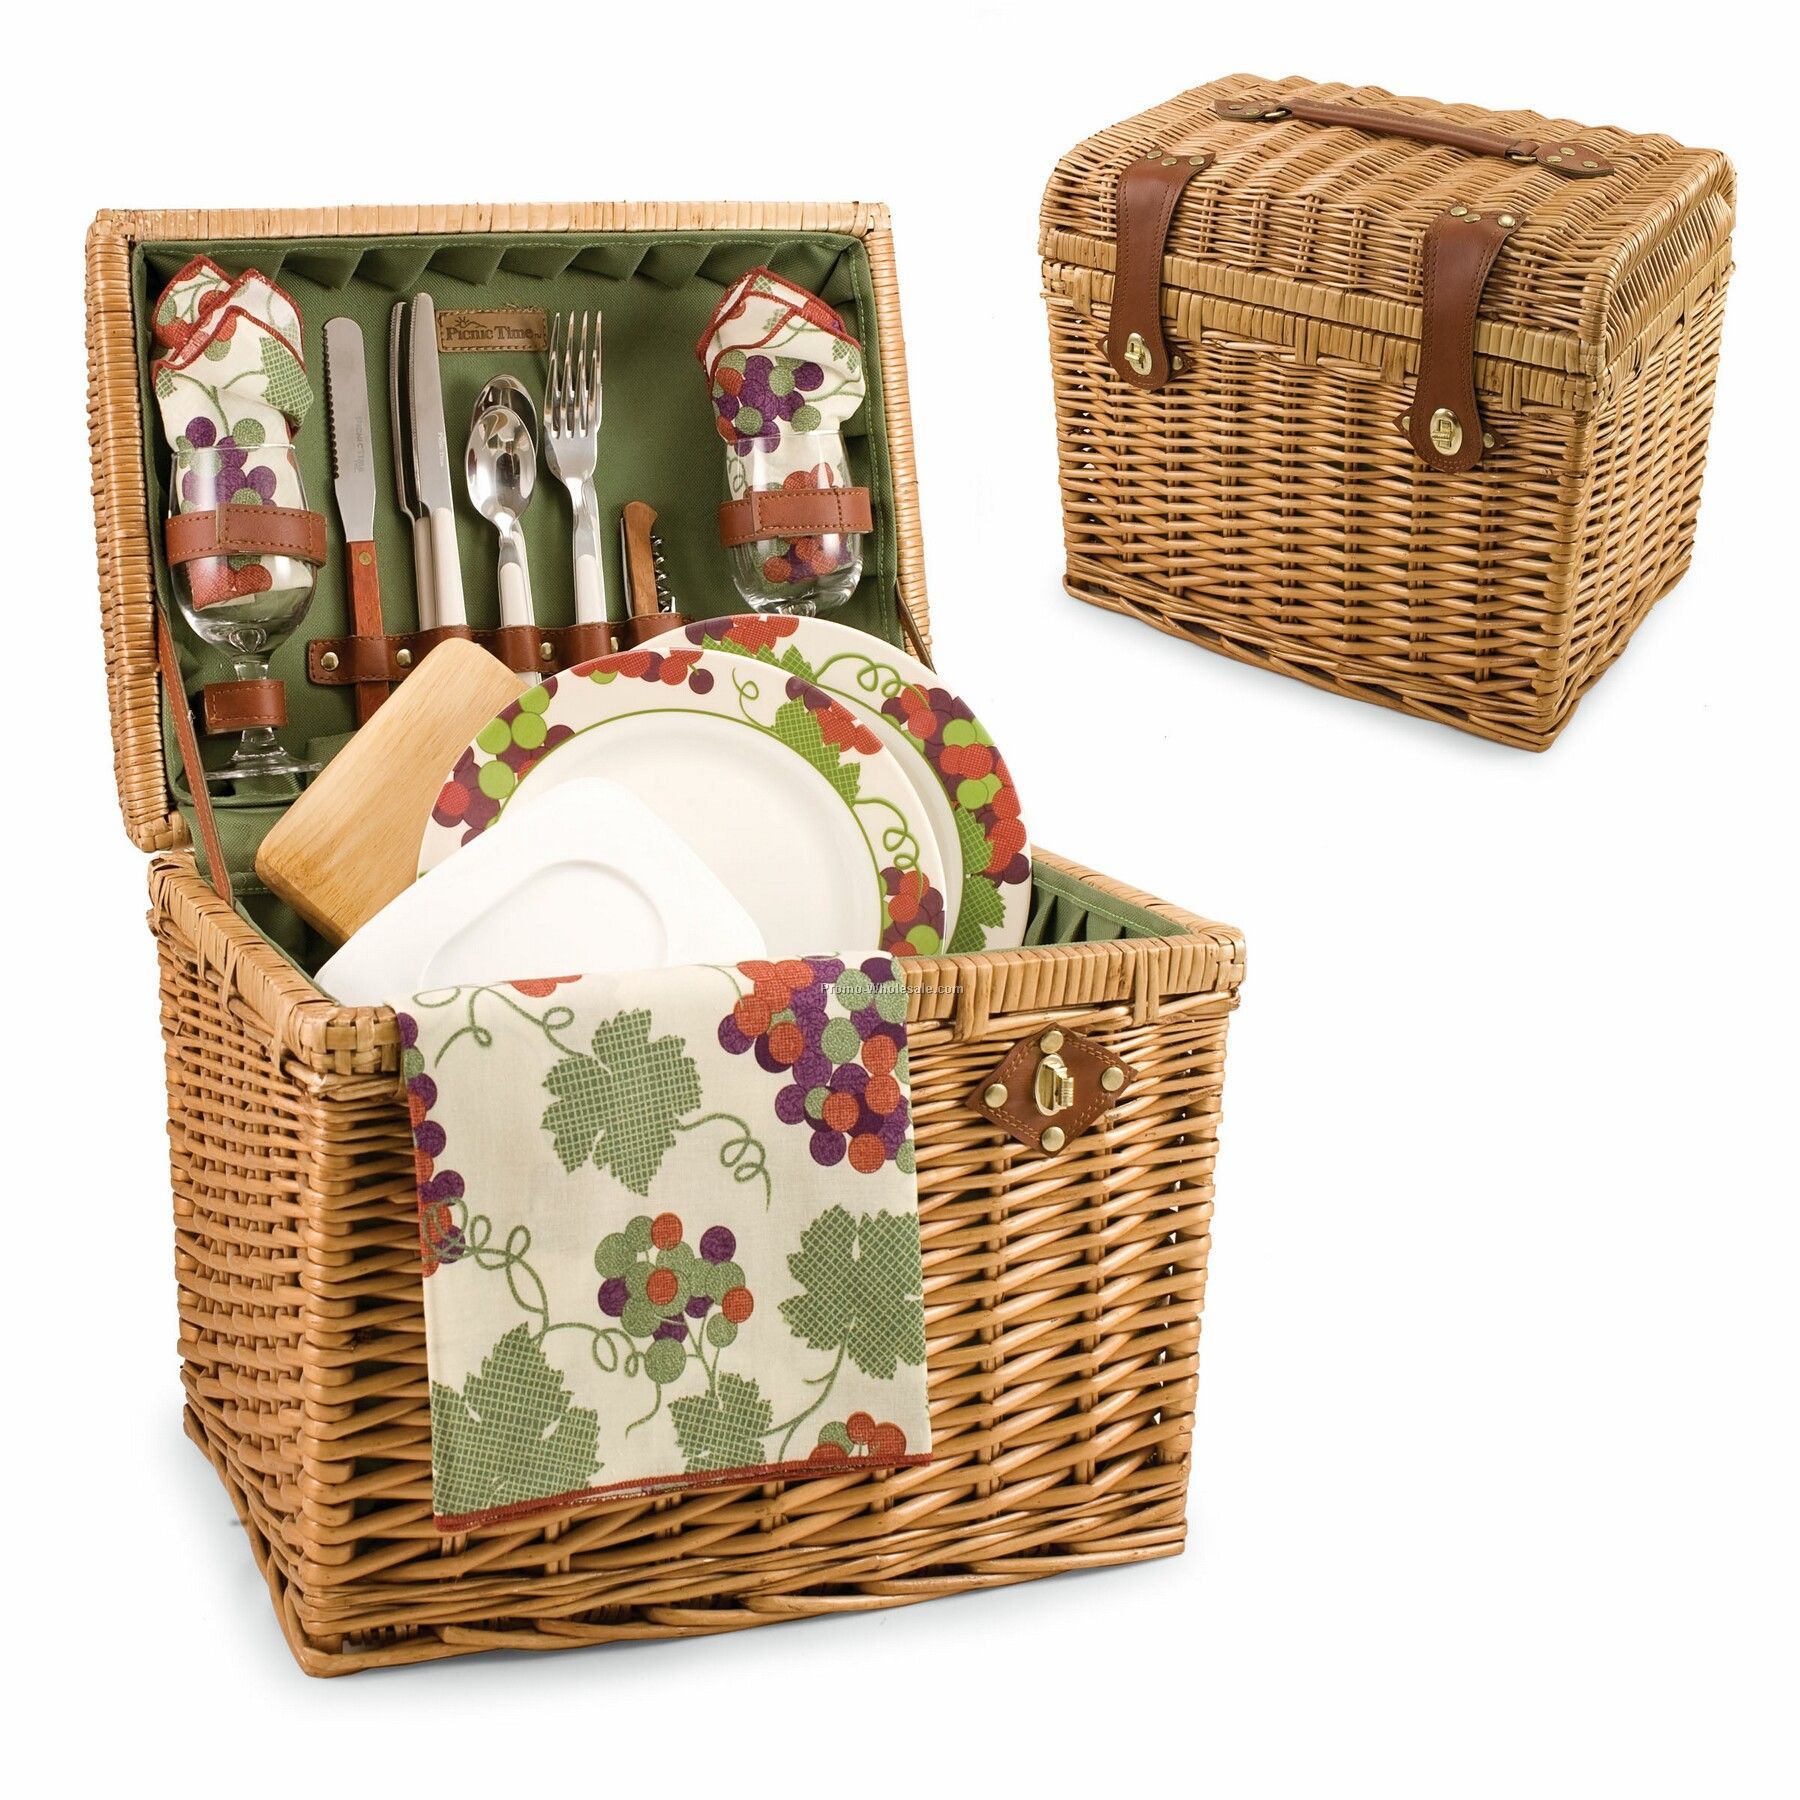 Yellowstone Deluxe Picnic Basket With Service For 2